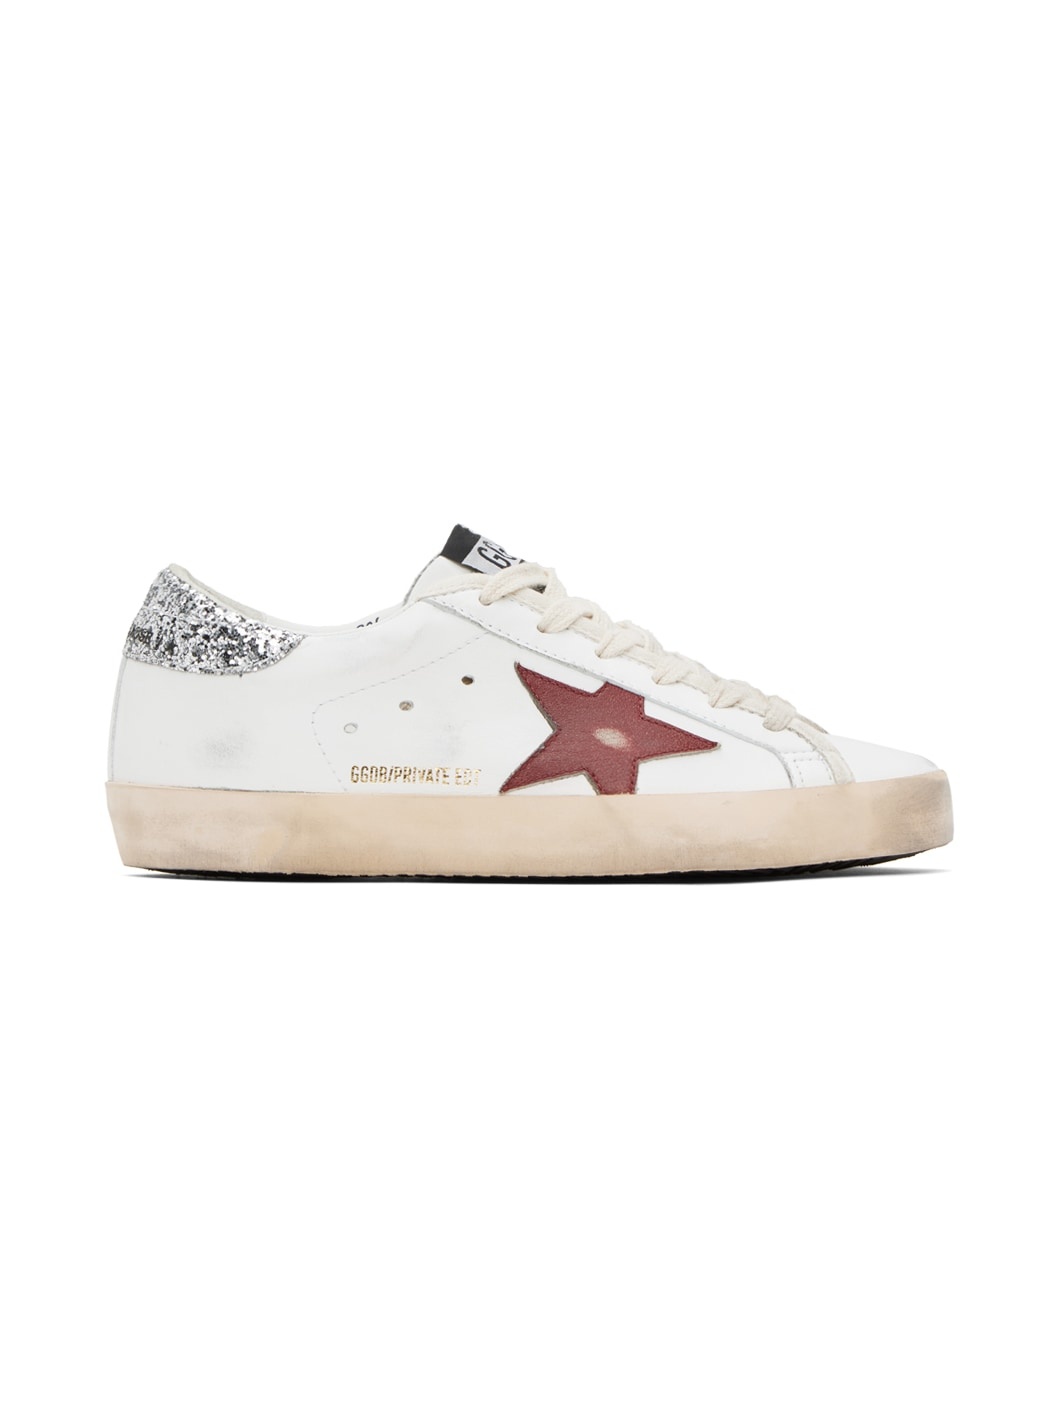 SSENSE Exclusive White Limited Edition Superstar Sneakers - 1